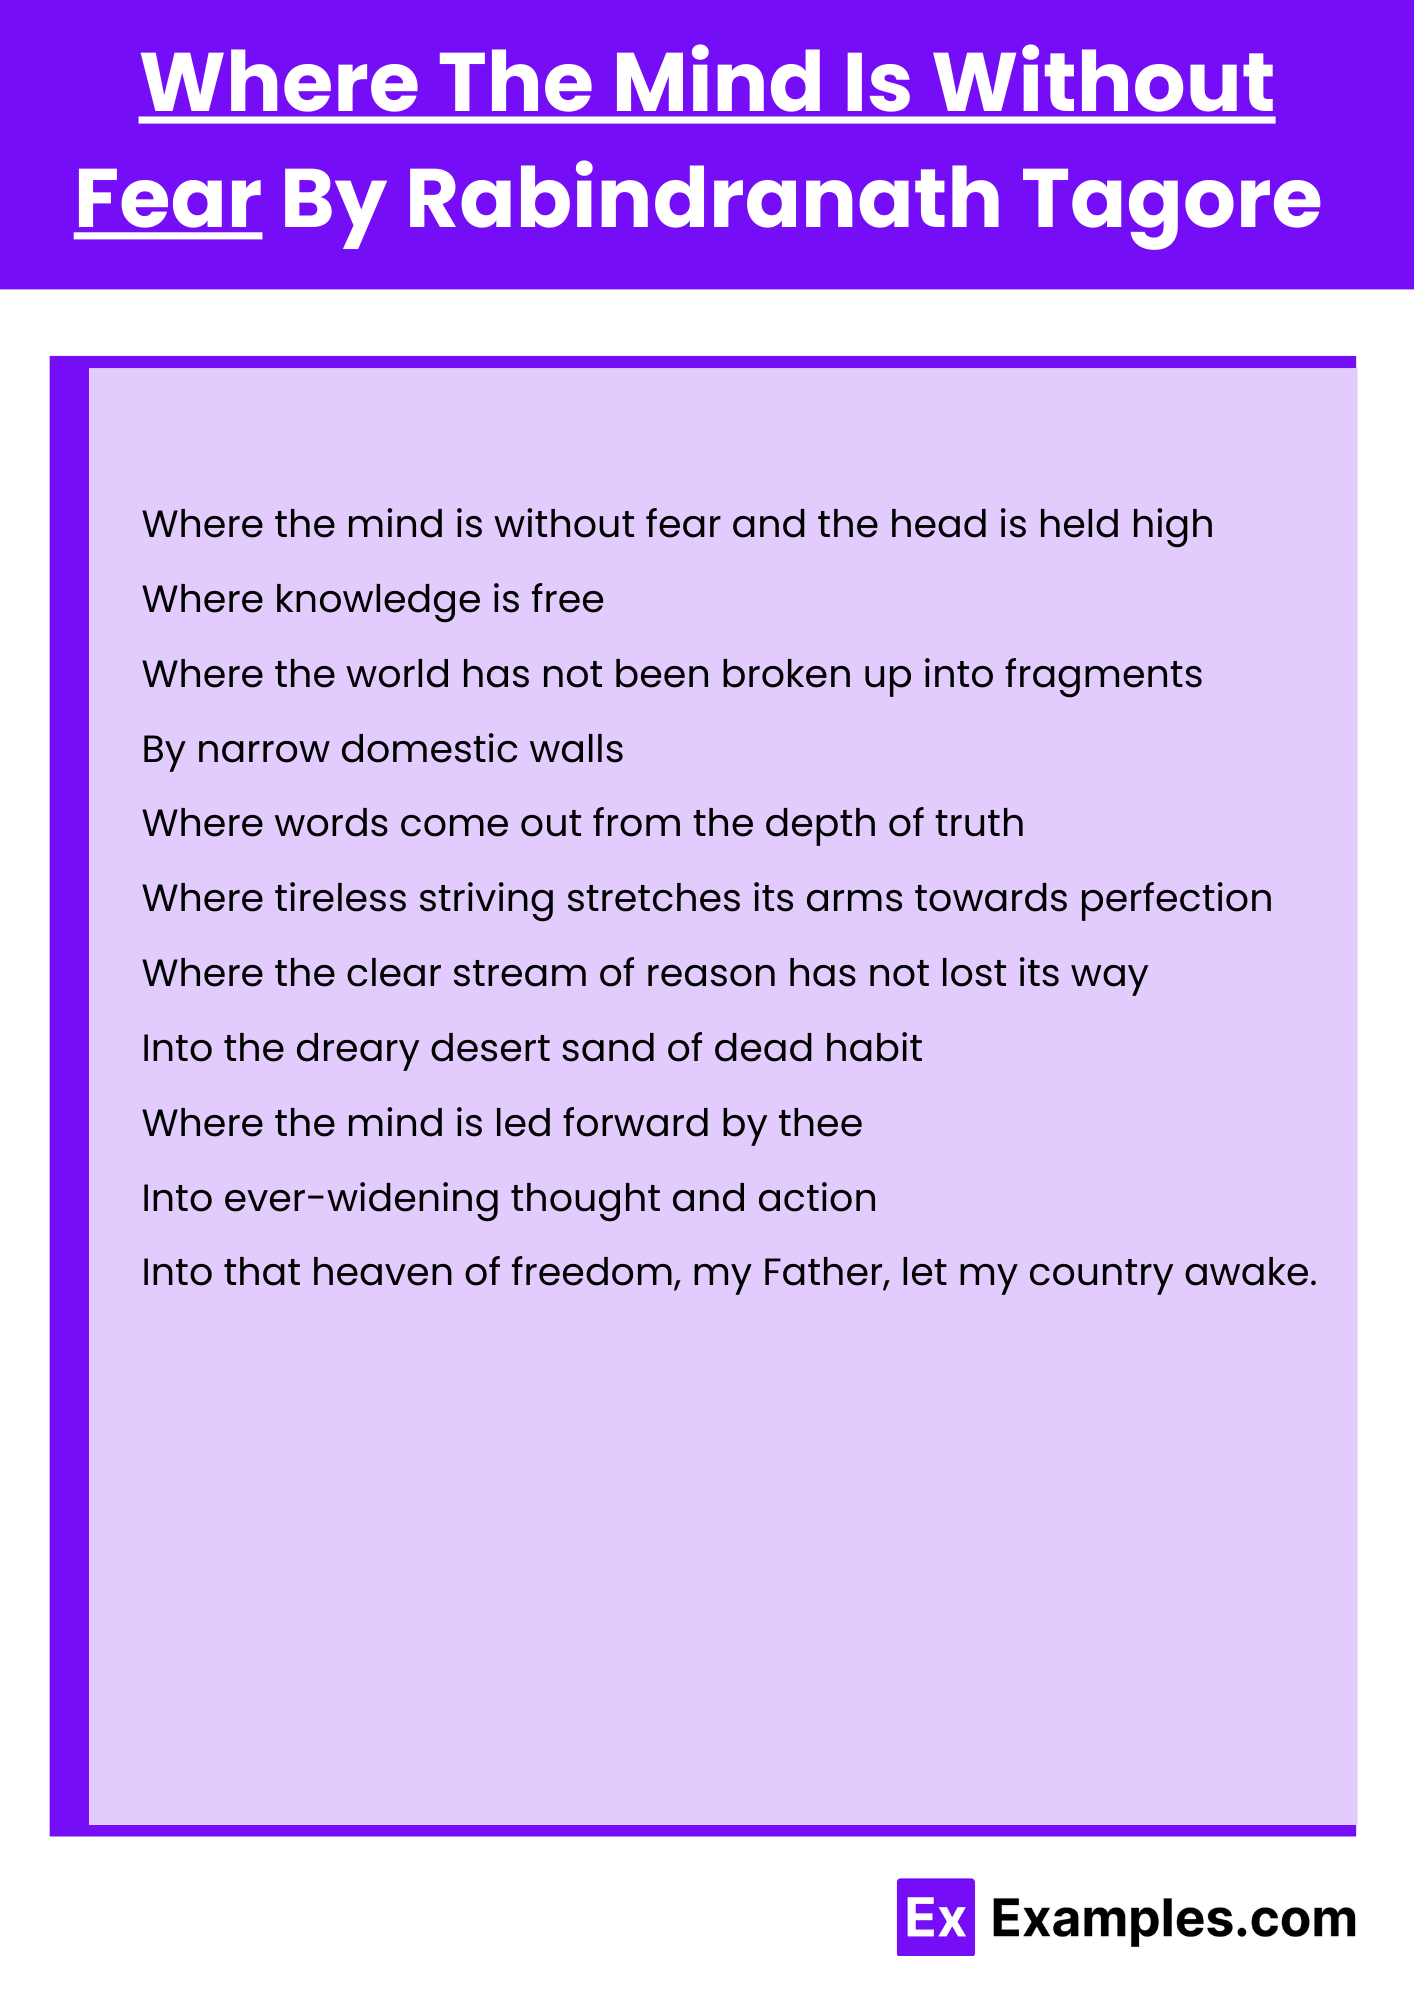 Where The Mind Is Without Fear By Rabindranath Tagore